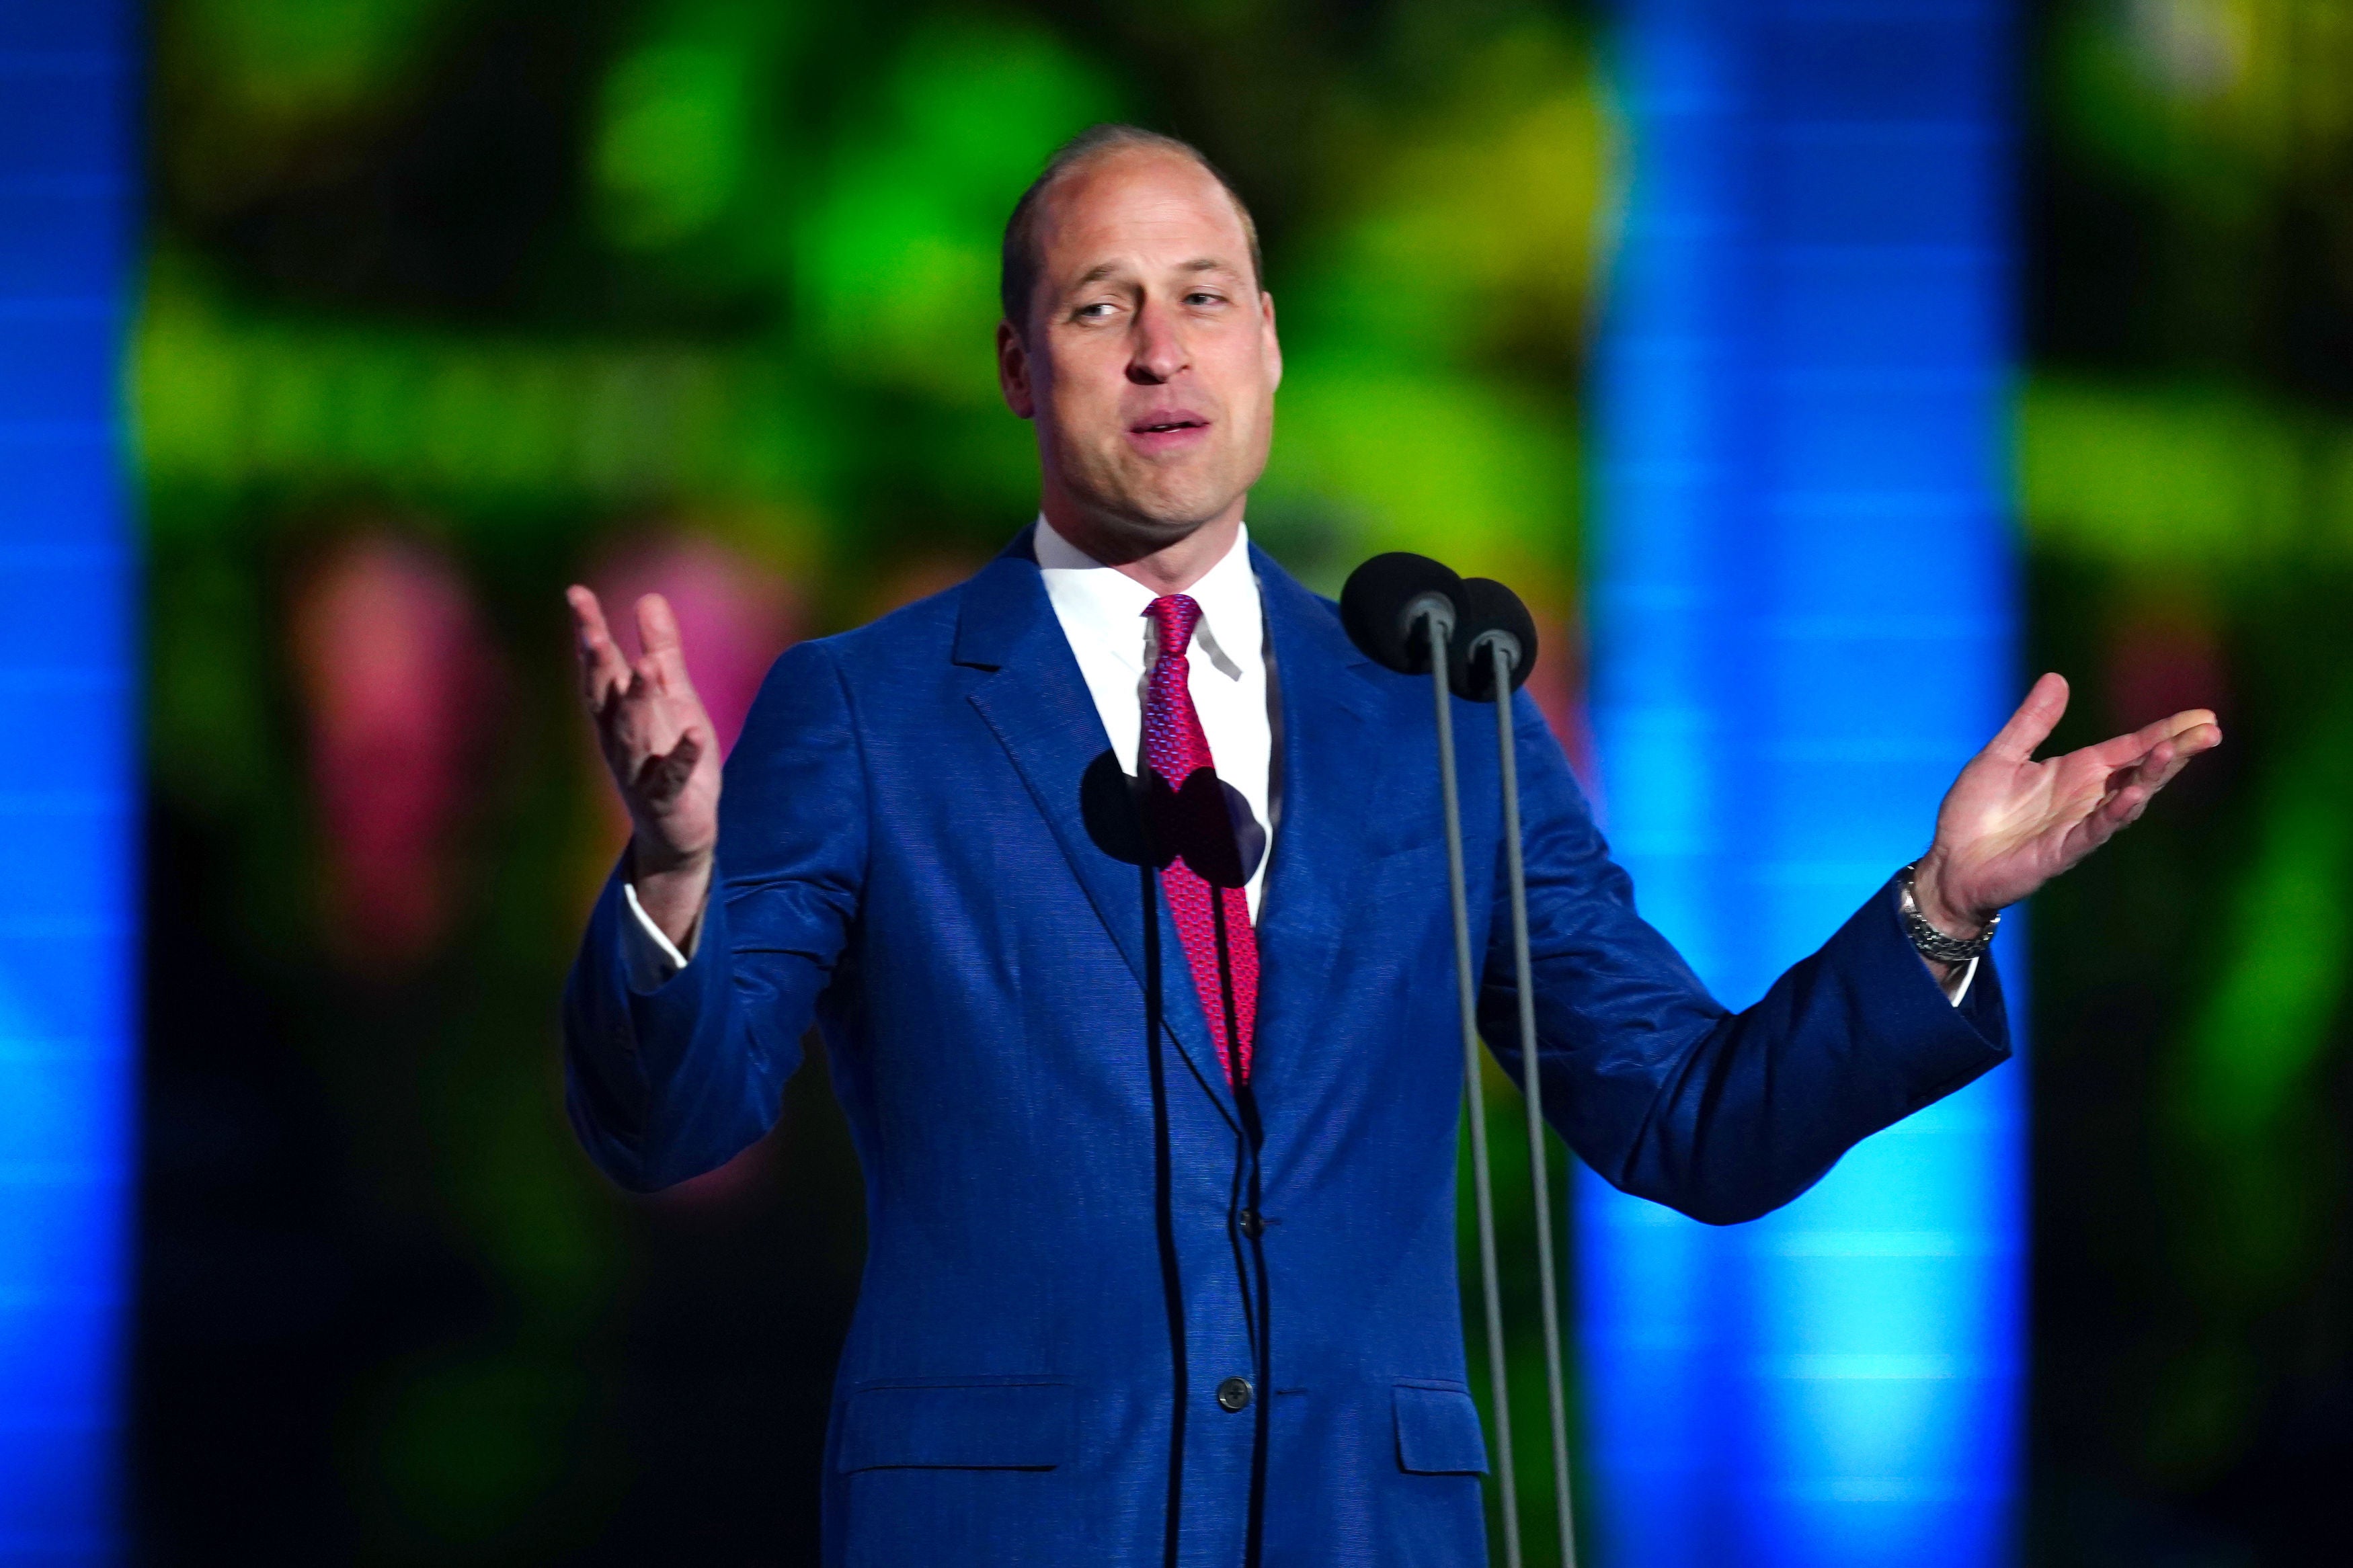 Prince William praises Queen’s optimism as he urges action to protect climate